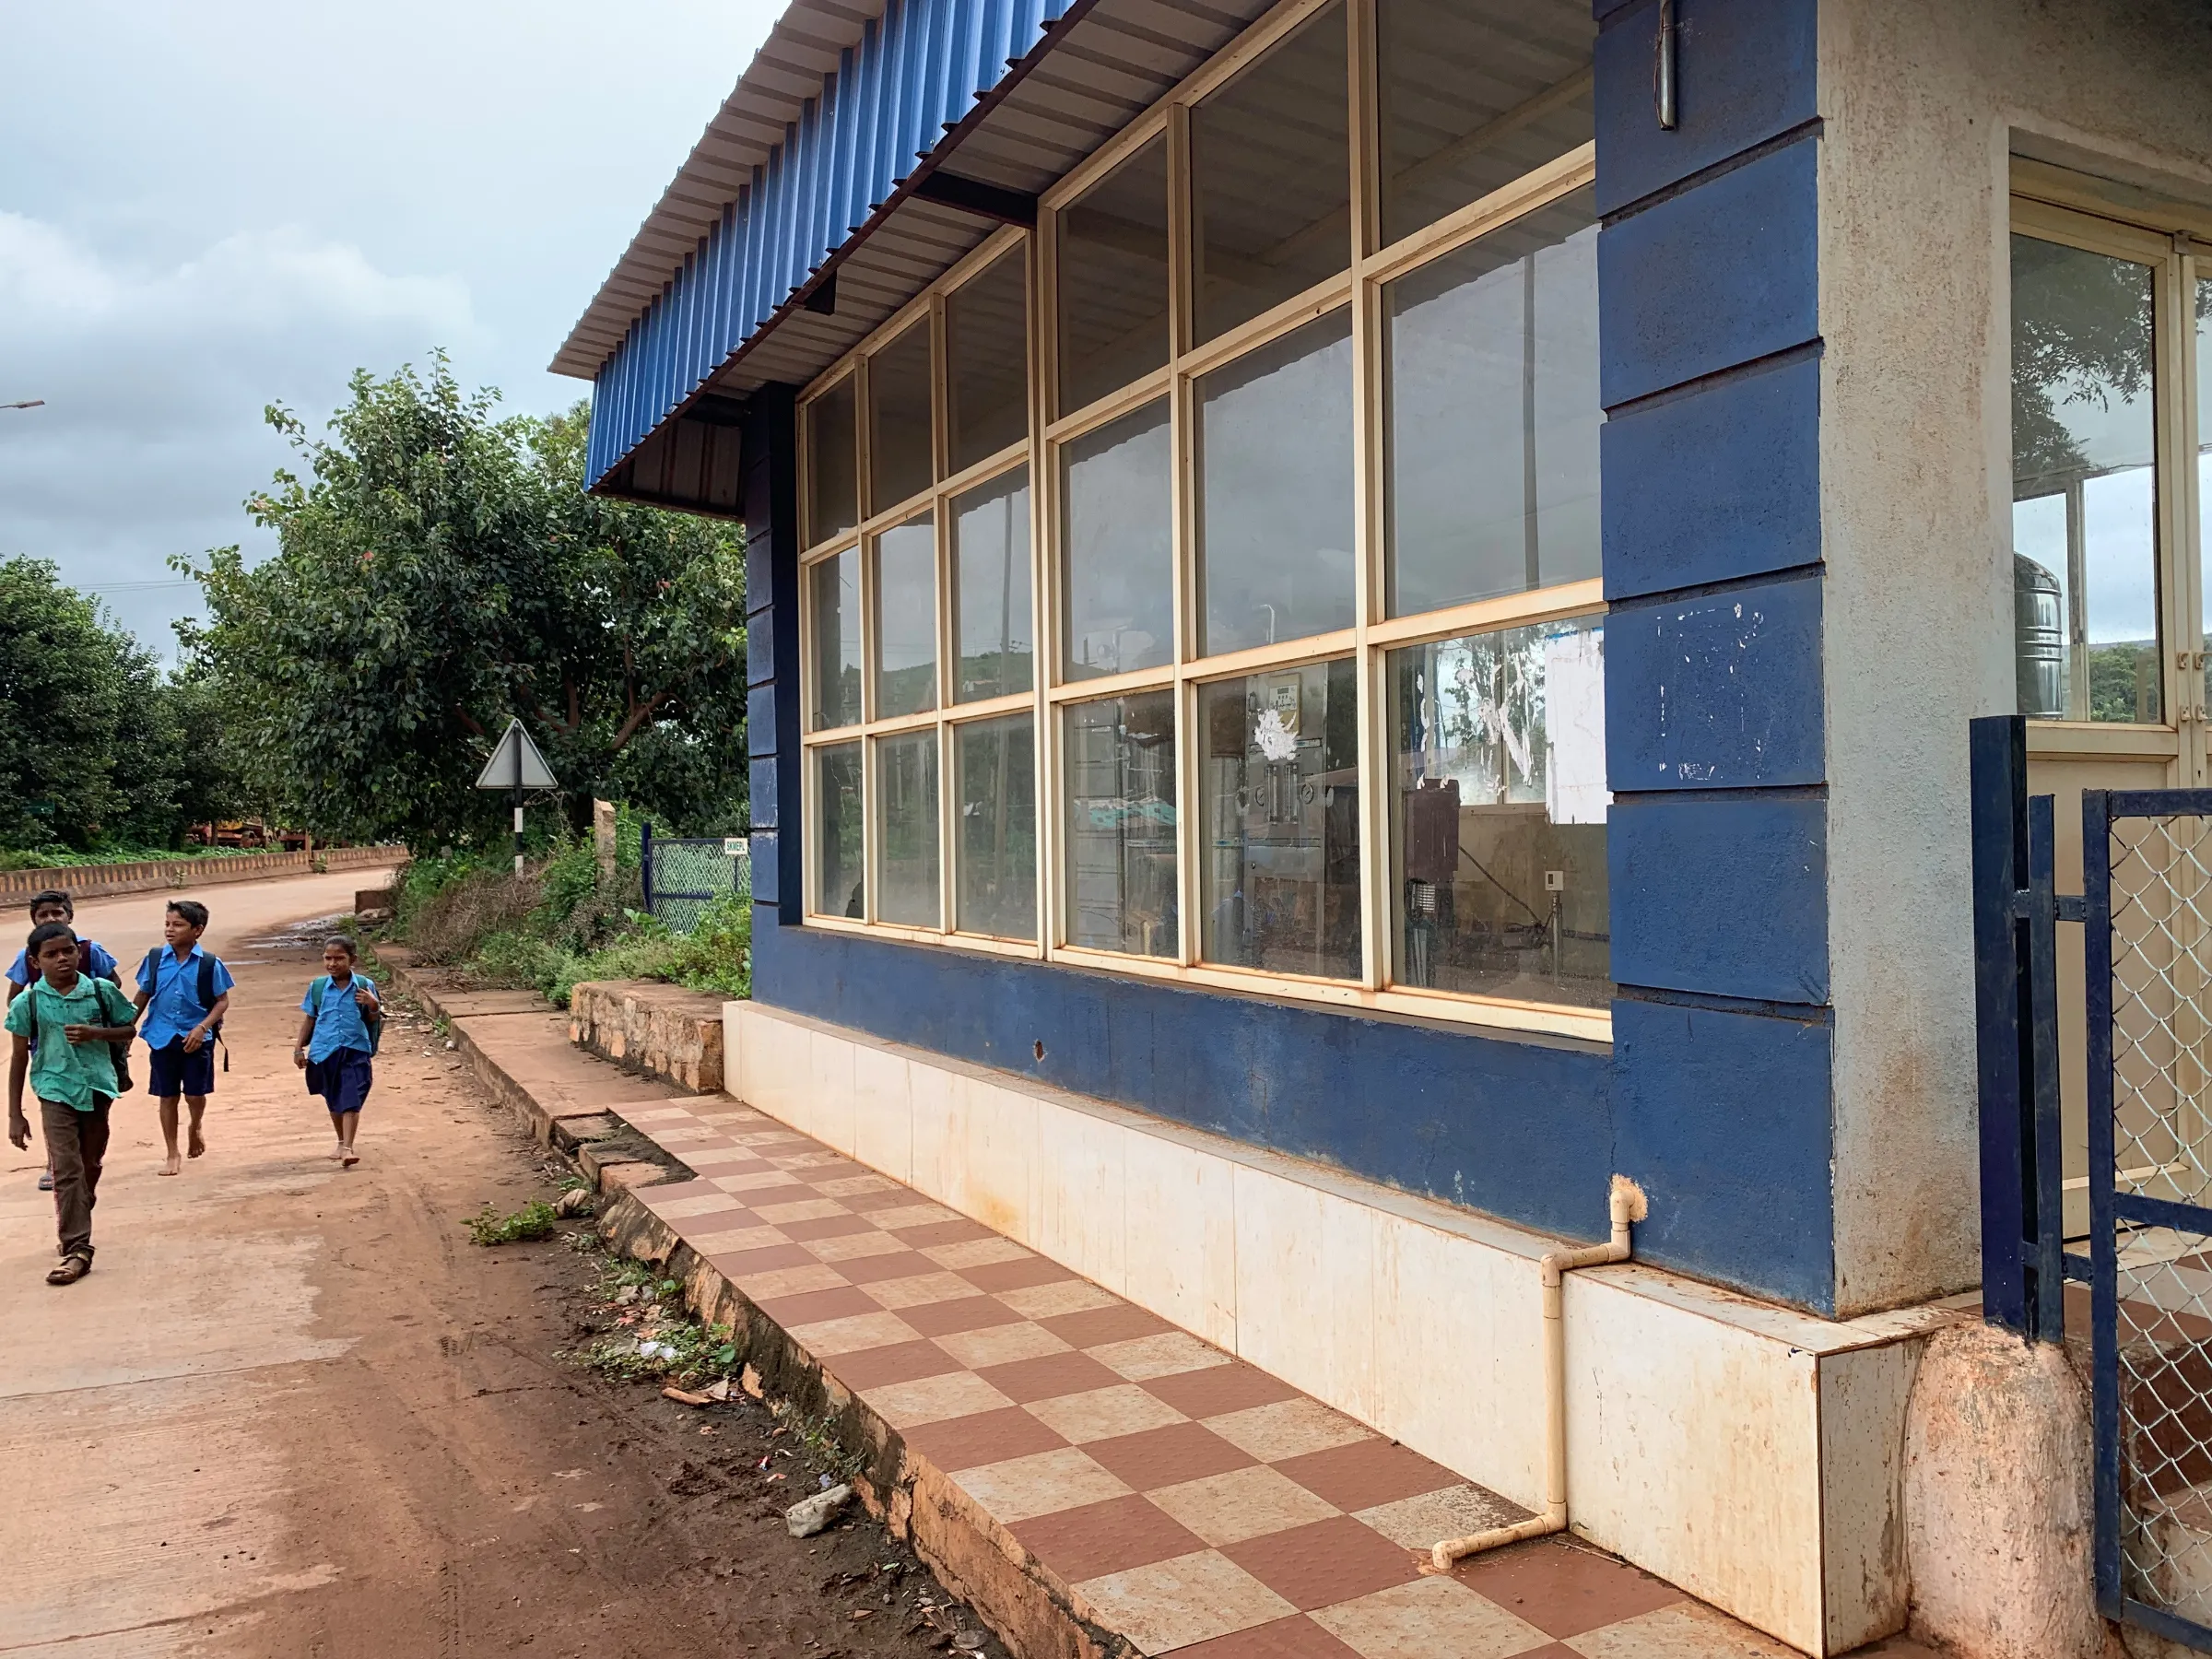 A building with blue walls and lots of windows next to a dirt road, where children walk